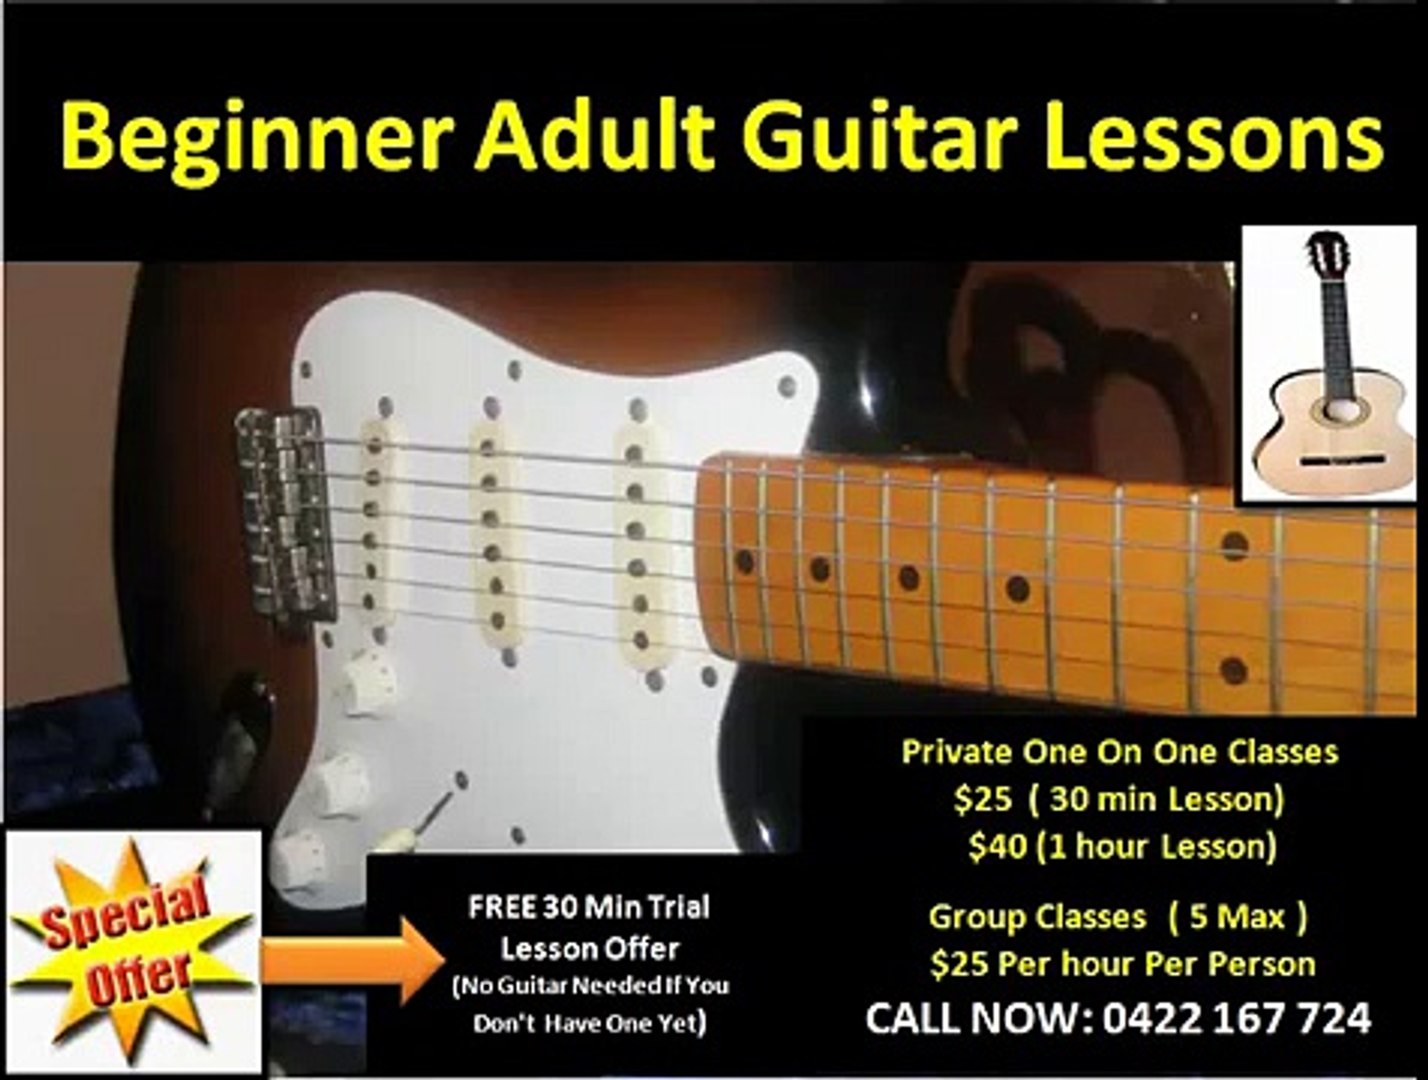 Beginner Adult Guitar Lessons Perth 0422 167 724 - video dailymotion